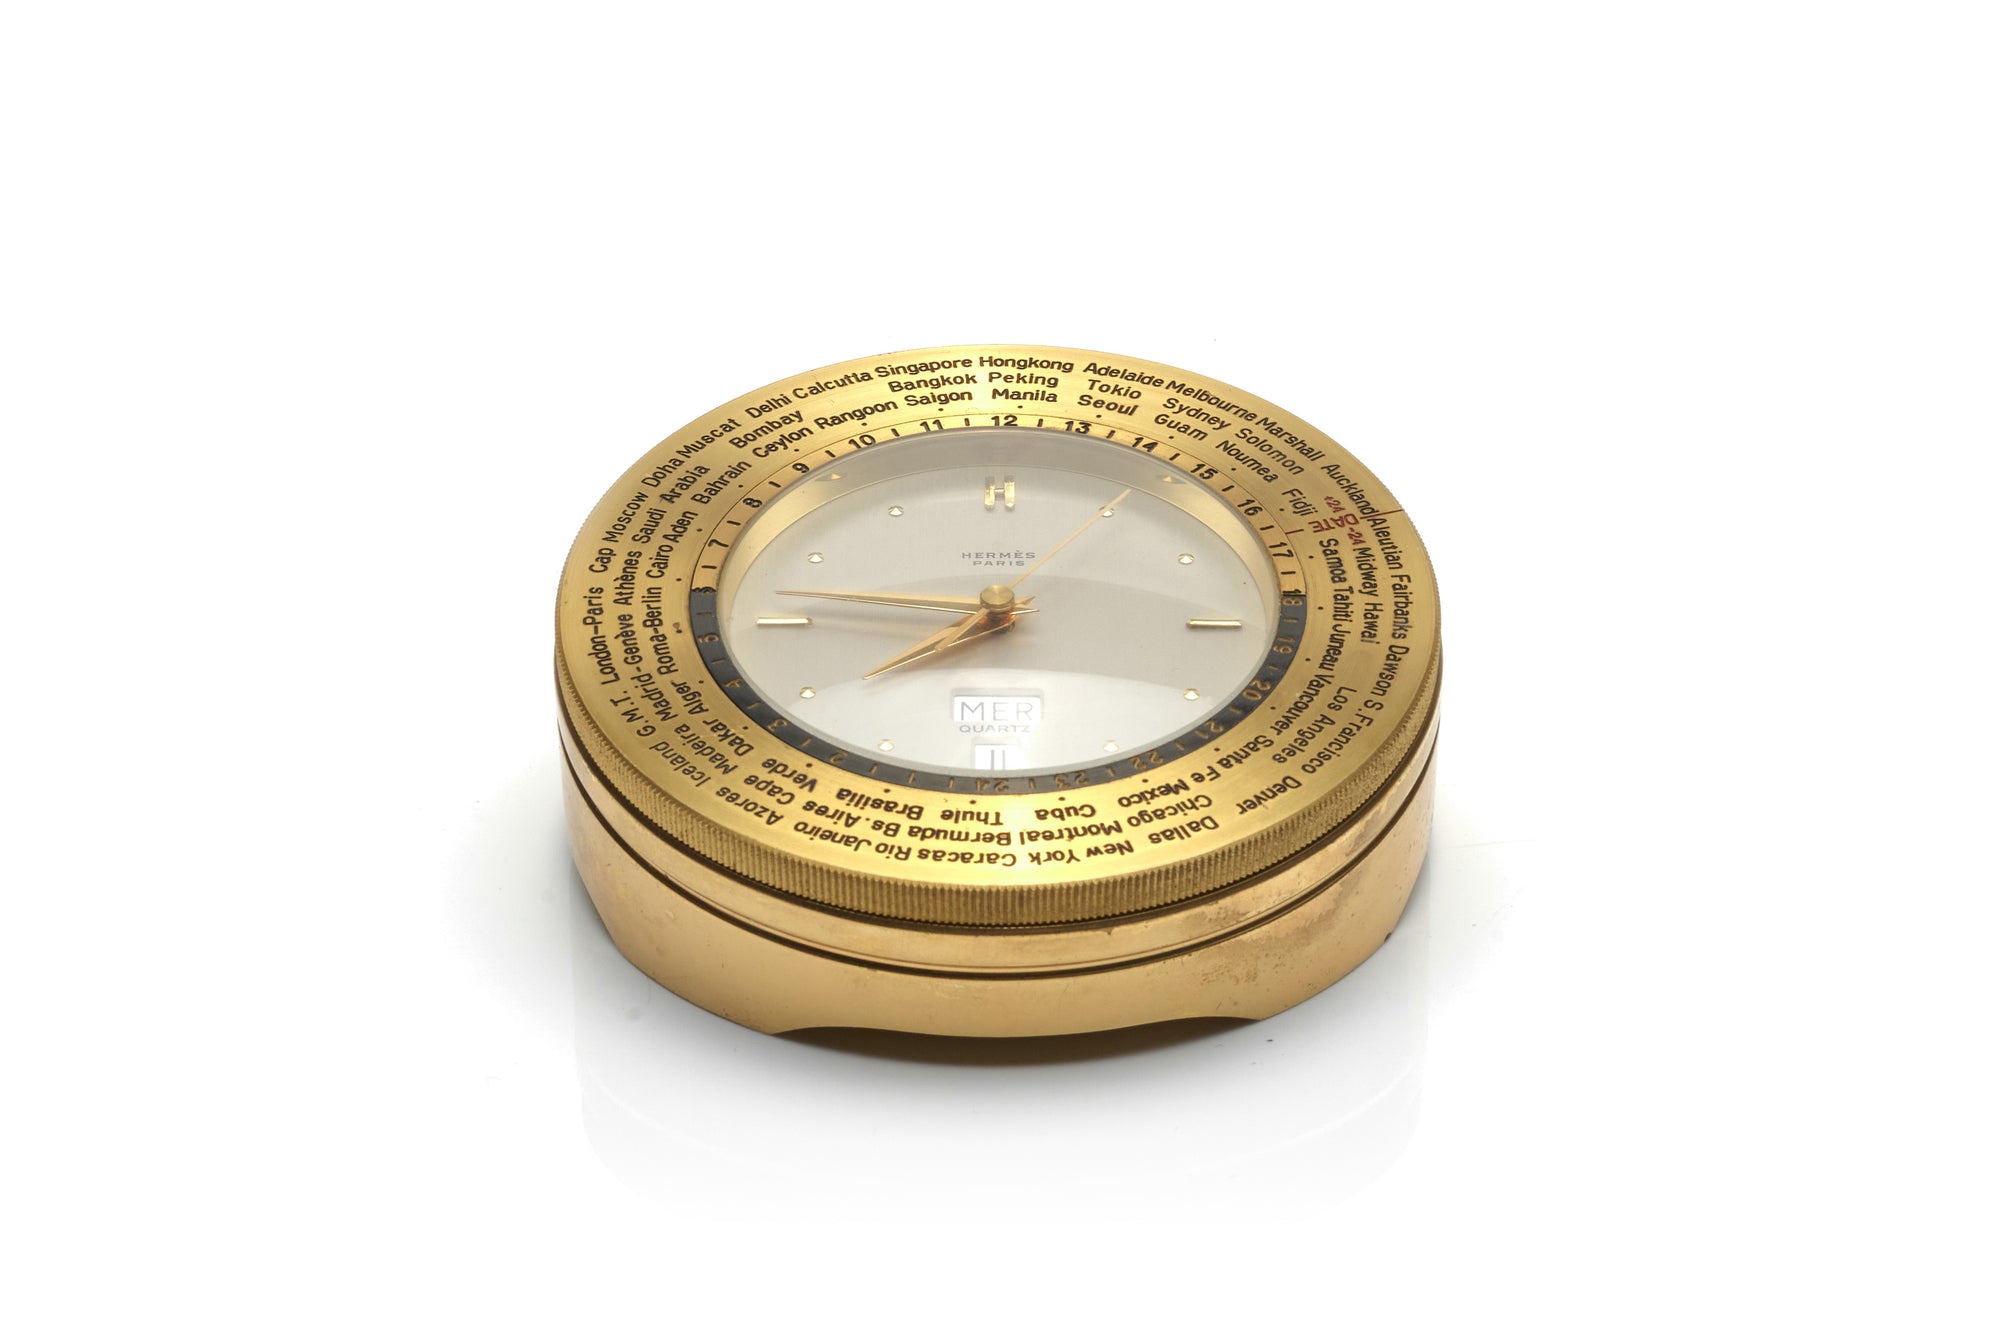 Hermes Wold-Time Clock